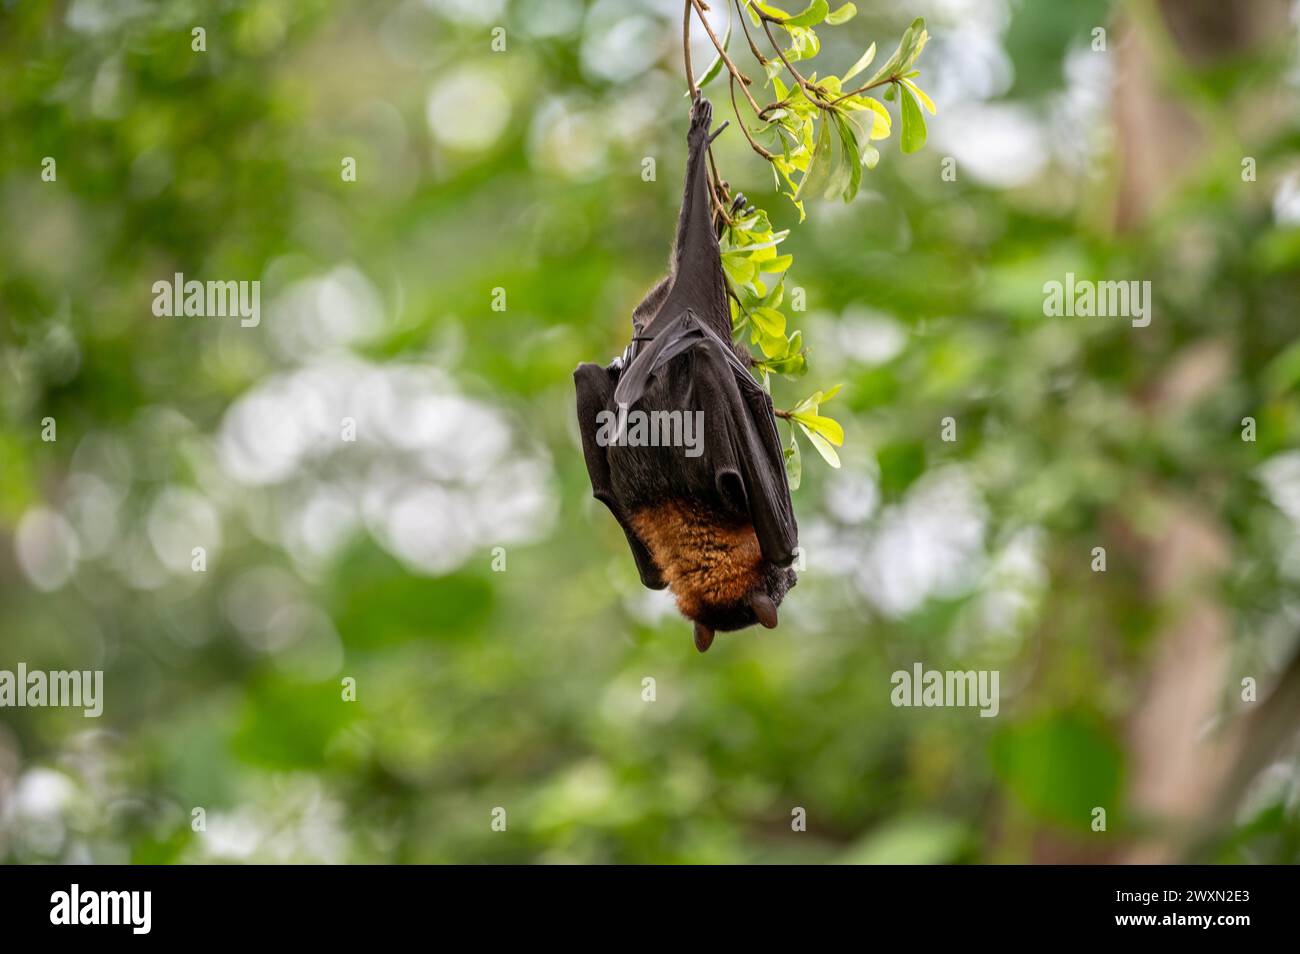 A bat upside down on a tree branch surrounded by leaves Stock Photo